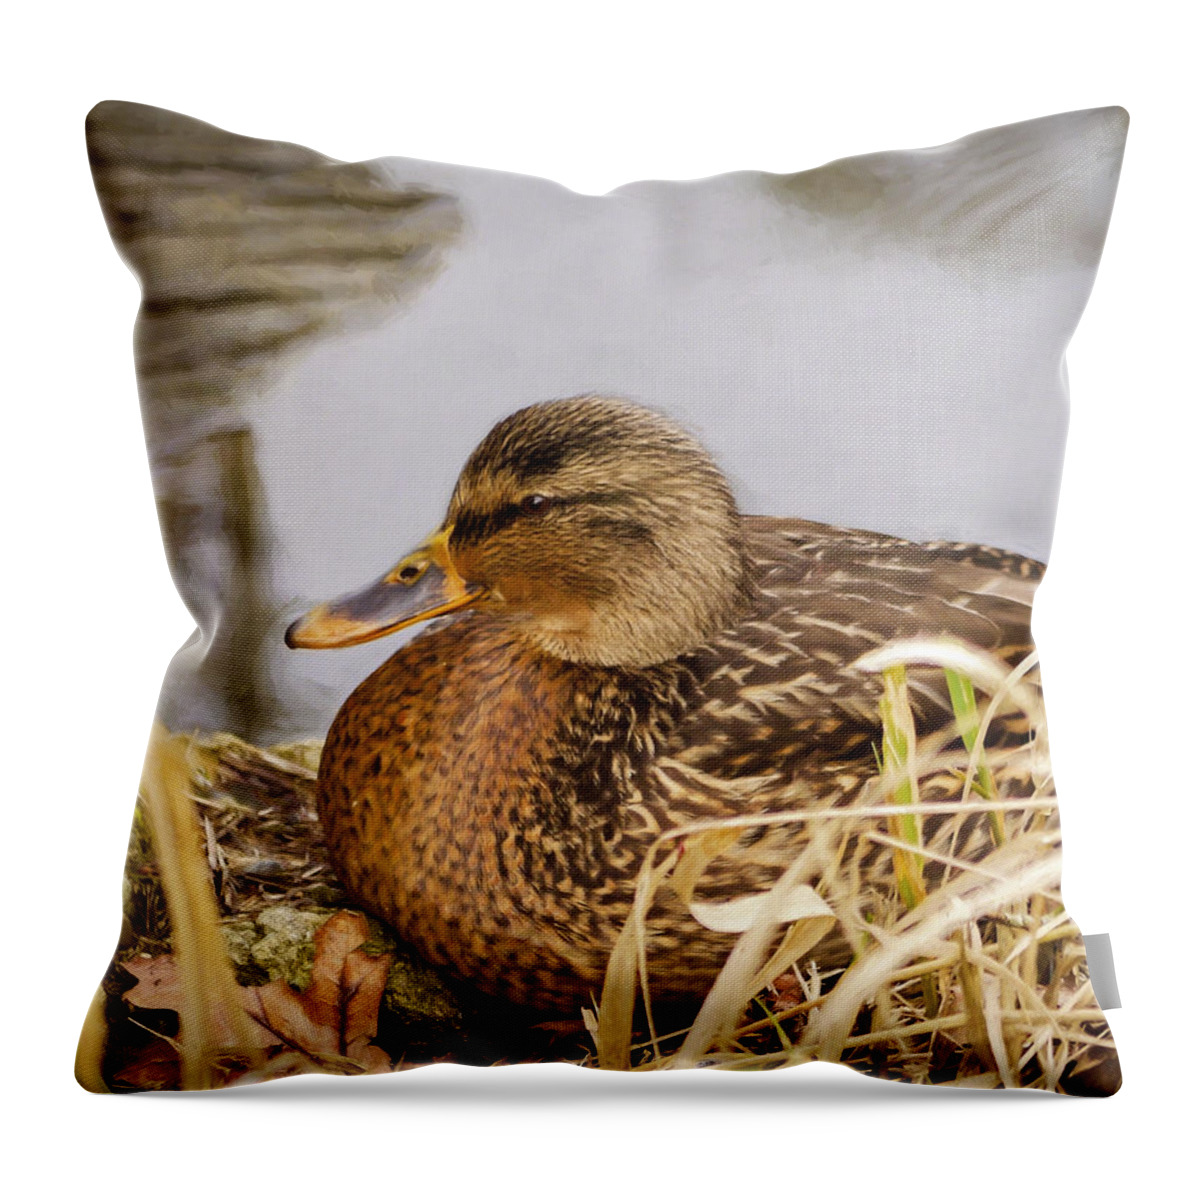 Afternoon Siesta Throw Pillow featuring the photograph Afternoon Siesta by Jordan Blackstone